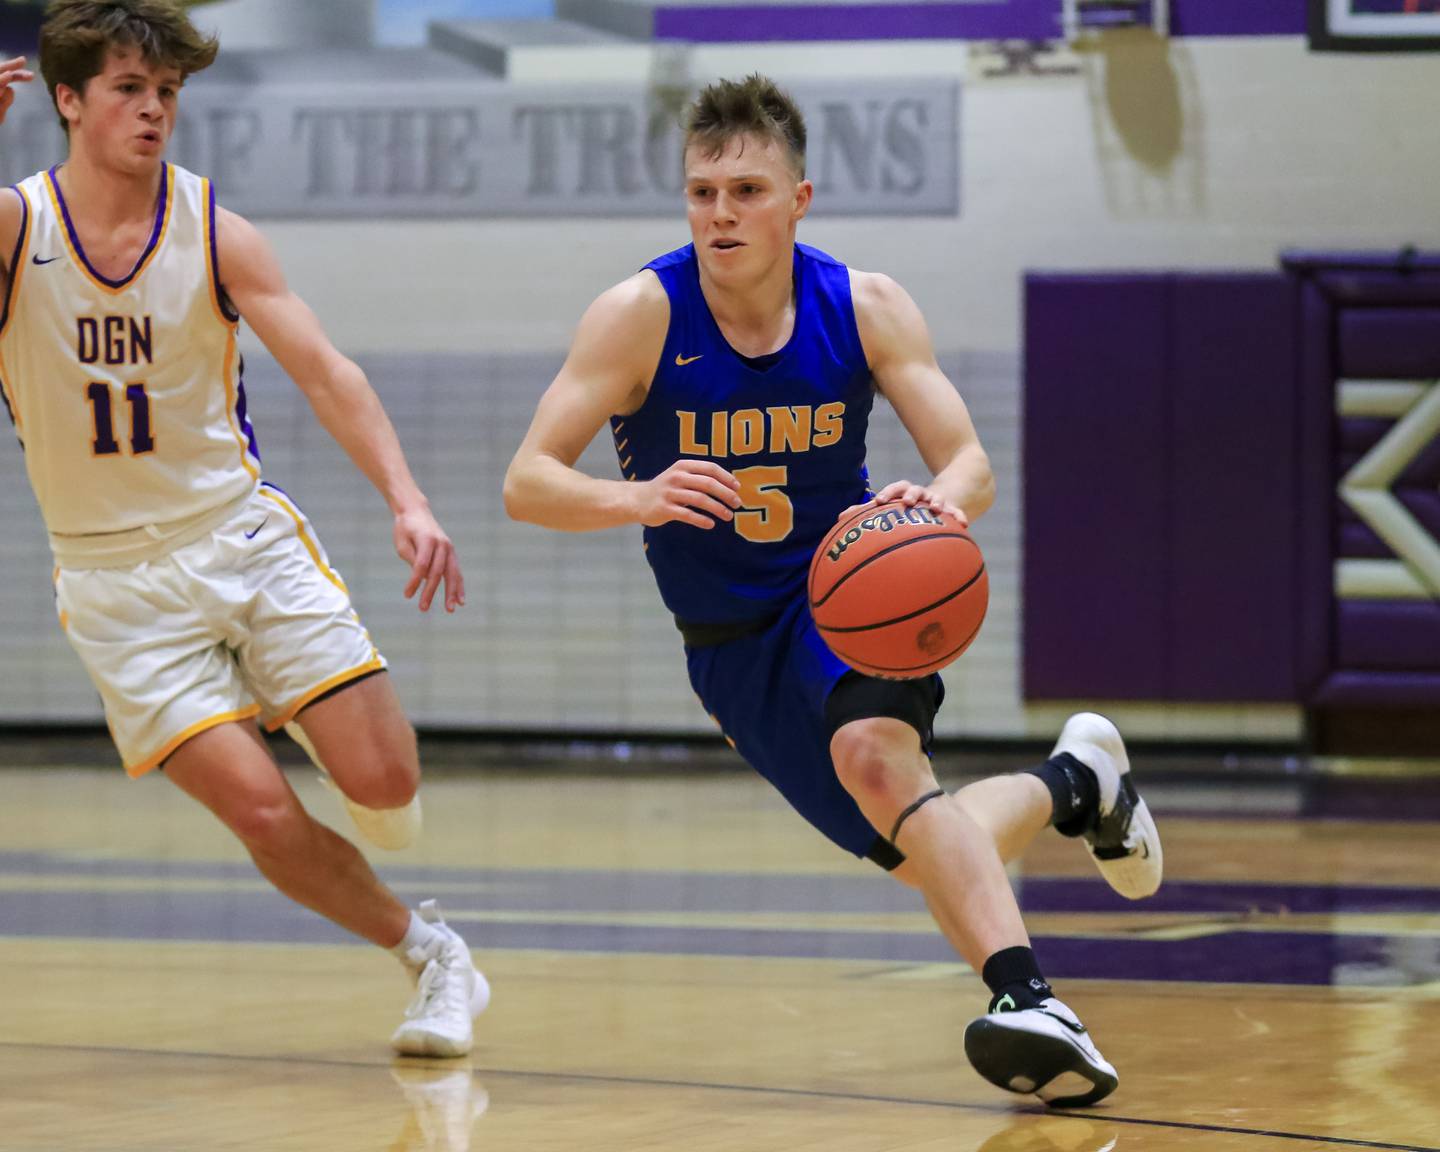 Lyon's Jackson Niego (5) advances the ball during varsity basketball game between Lyons at Downers Grove North.  Jan 31, 2023.